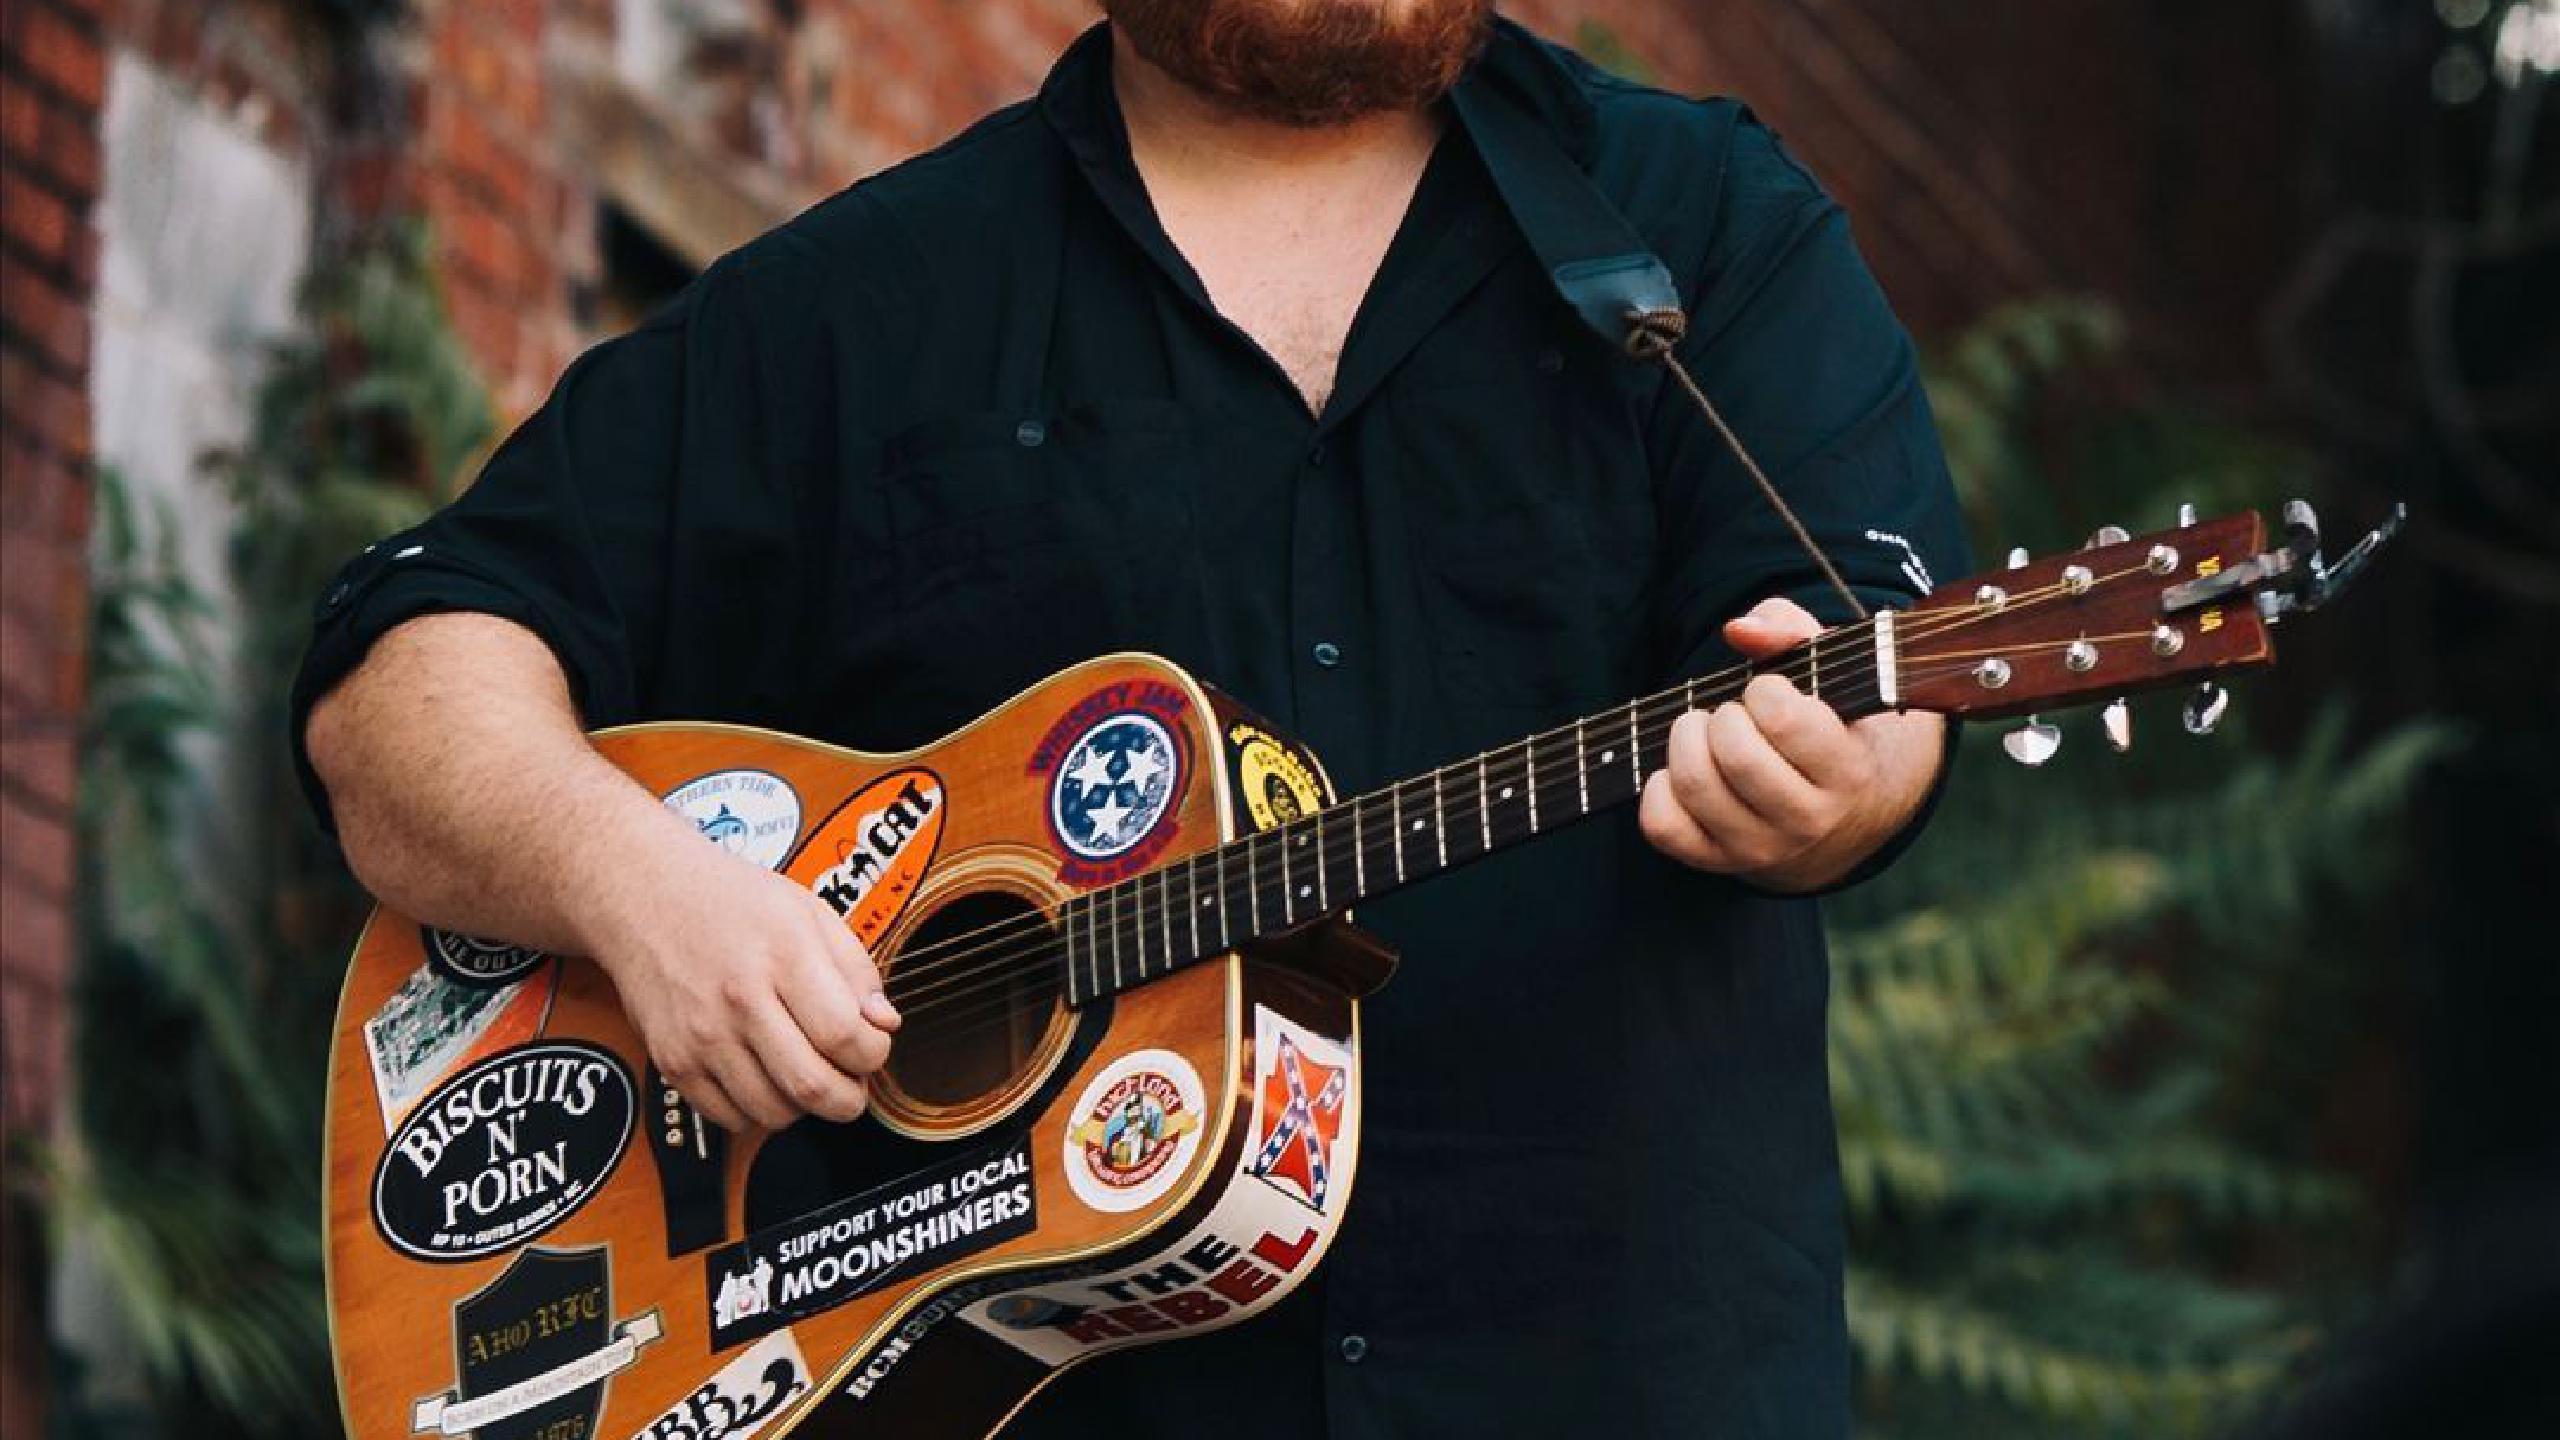 Luke Combs tour dates 2019 2020. Luke Combs tickets and concerts